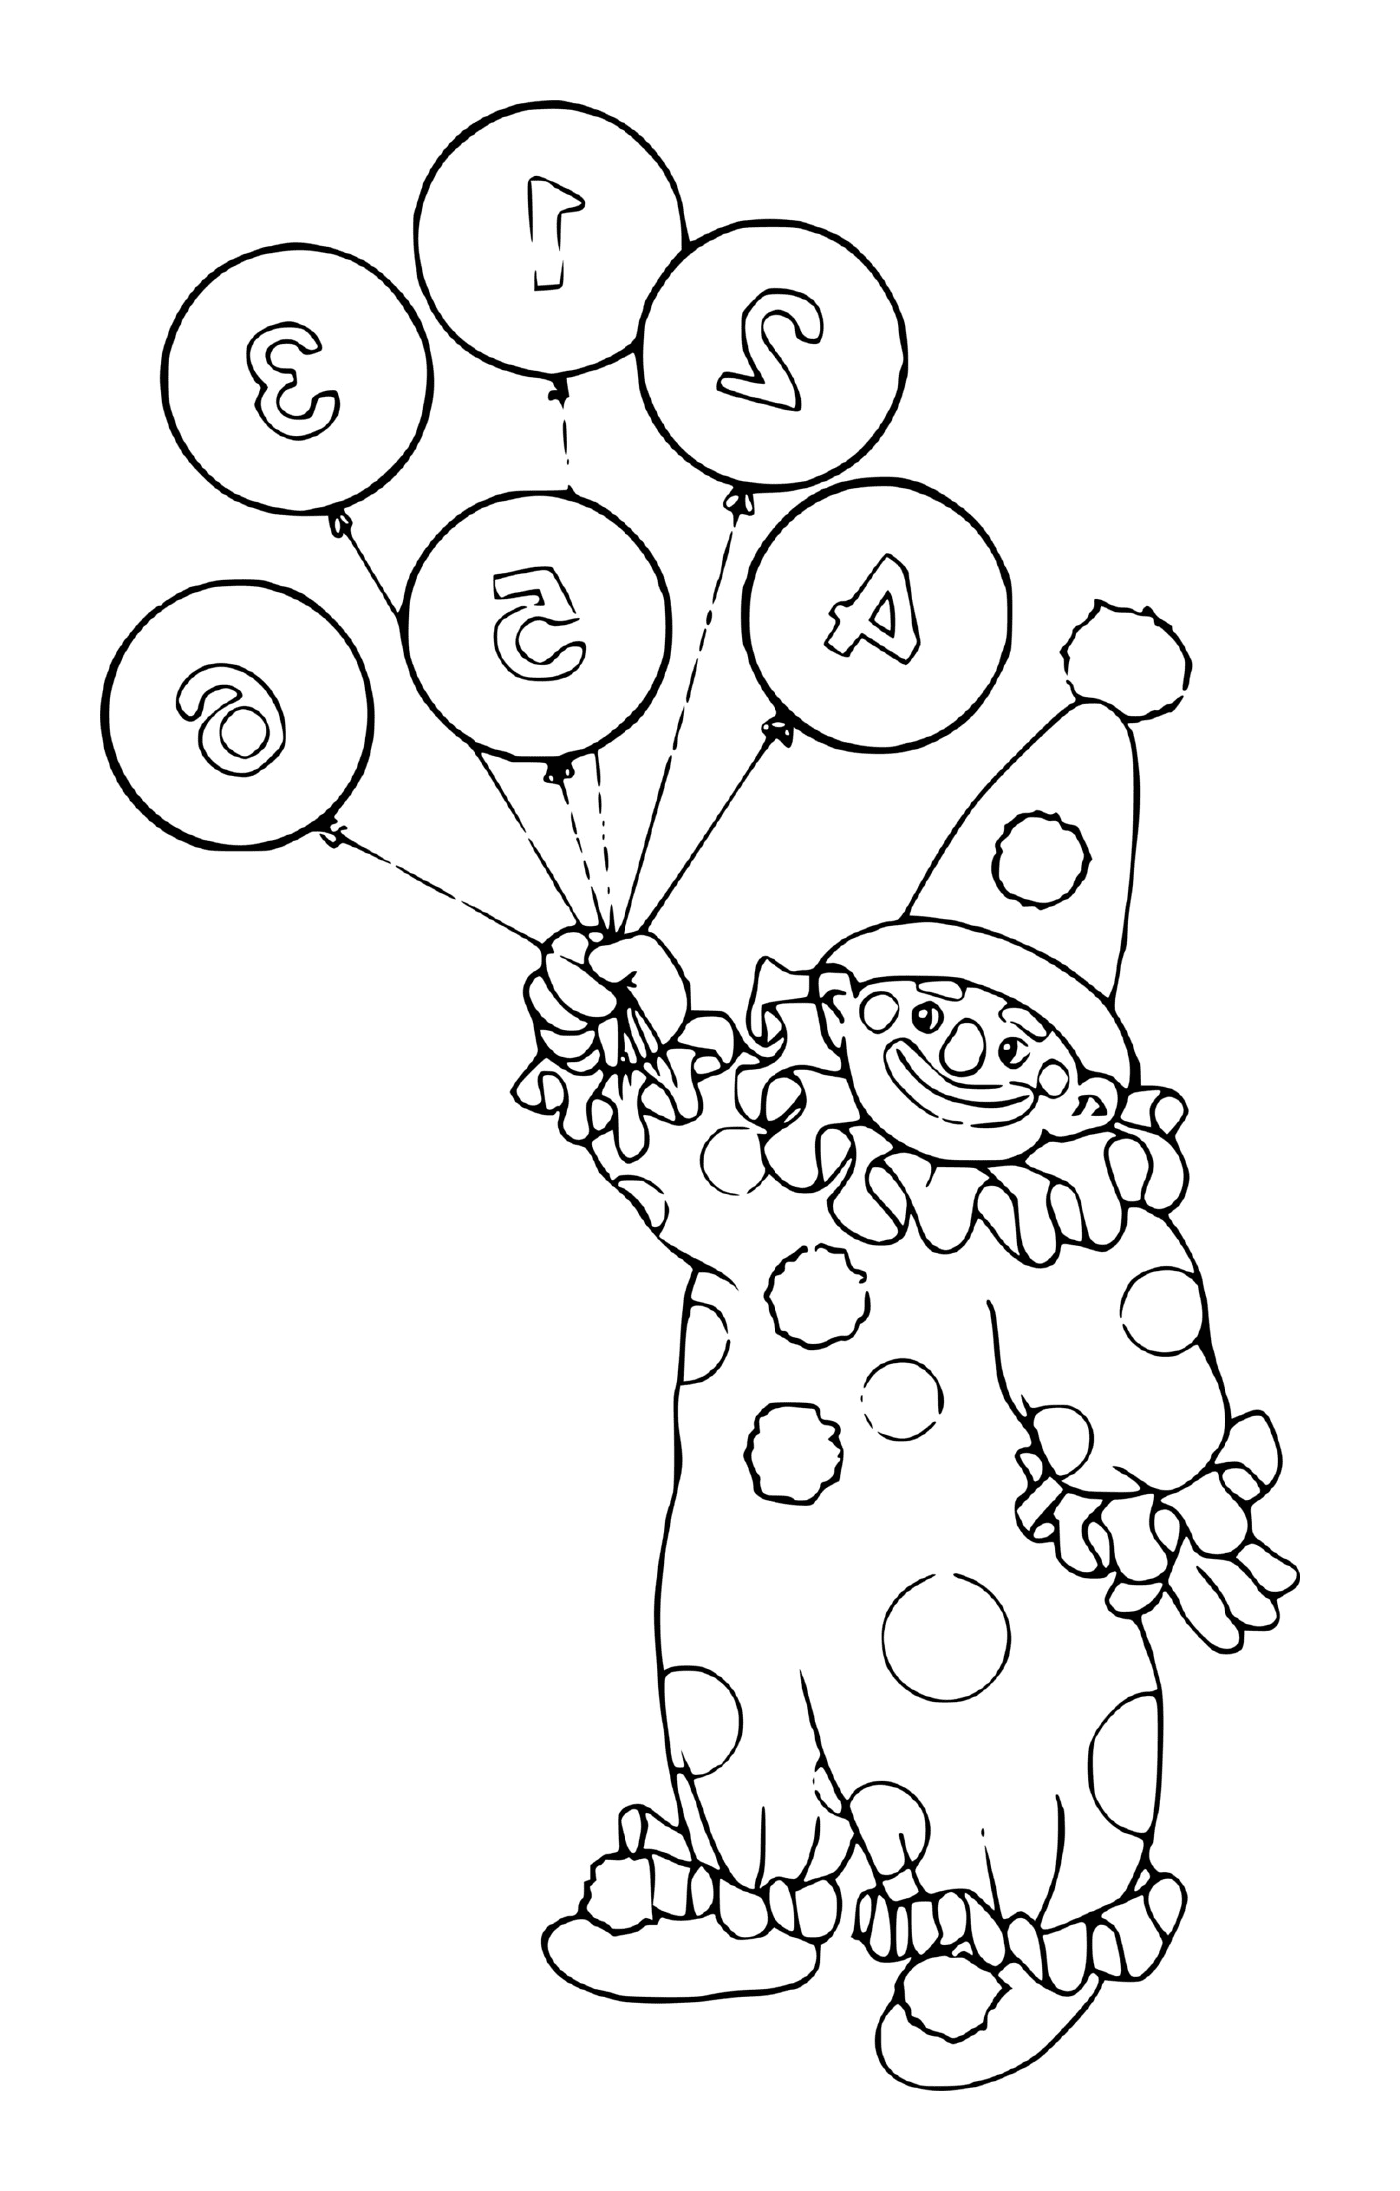  Clown holding numbered balloons 